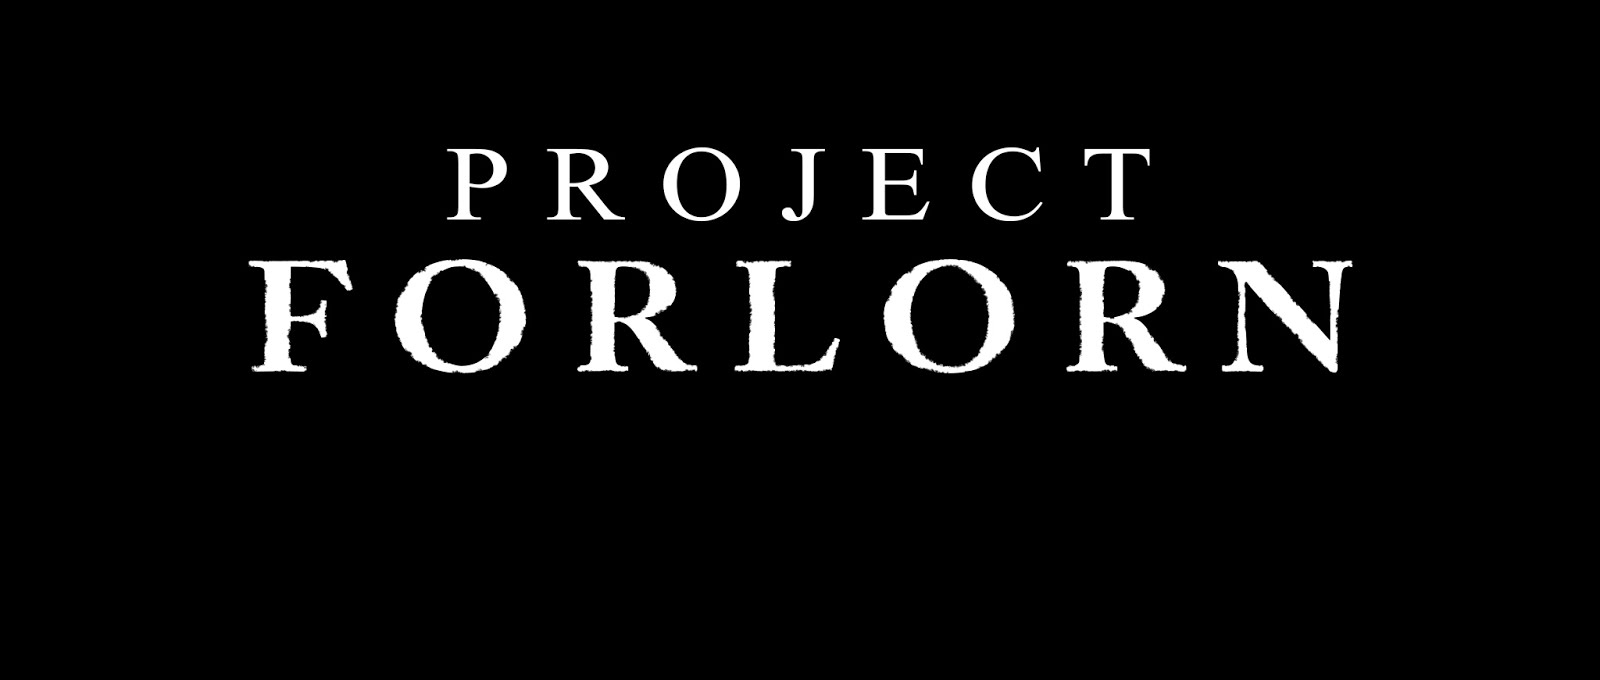 Project Forlorn